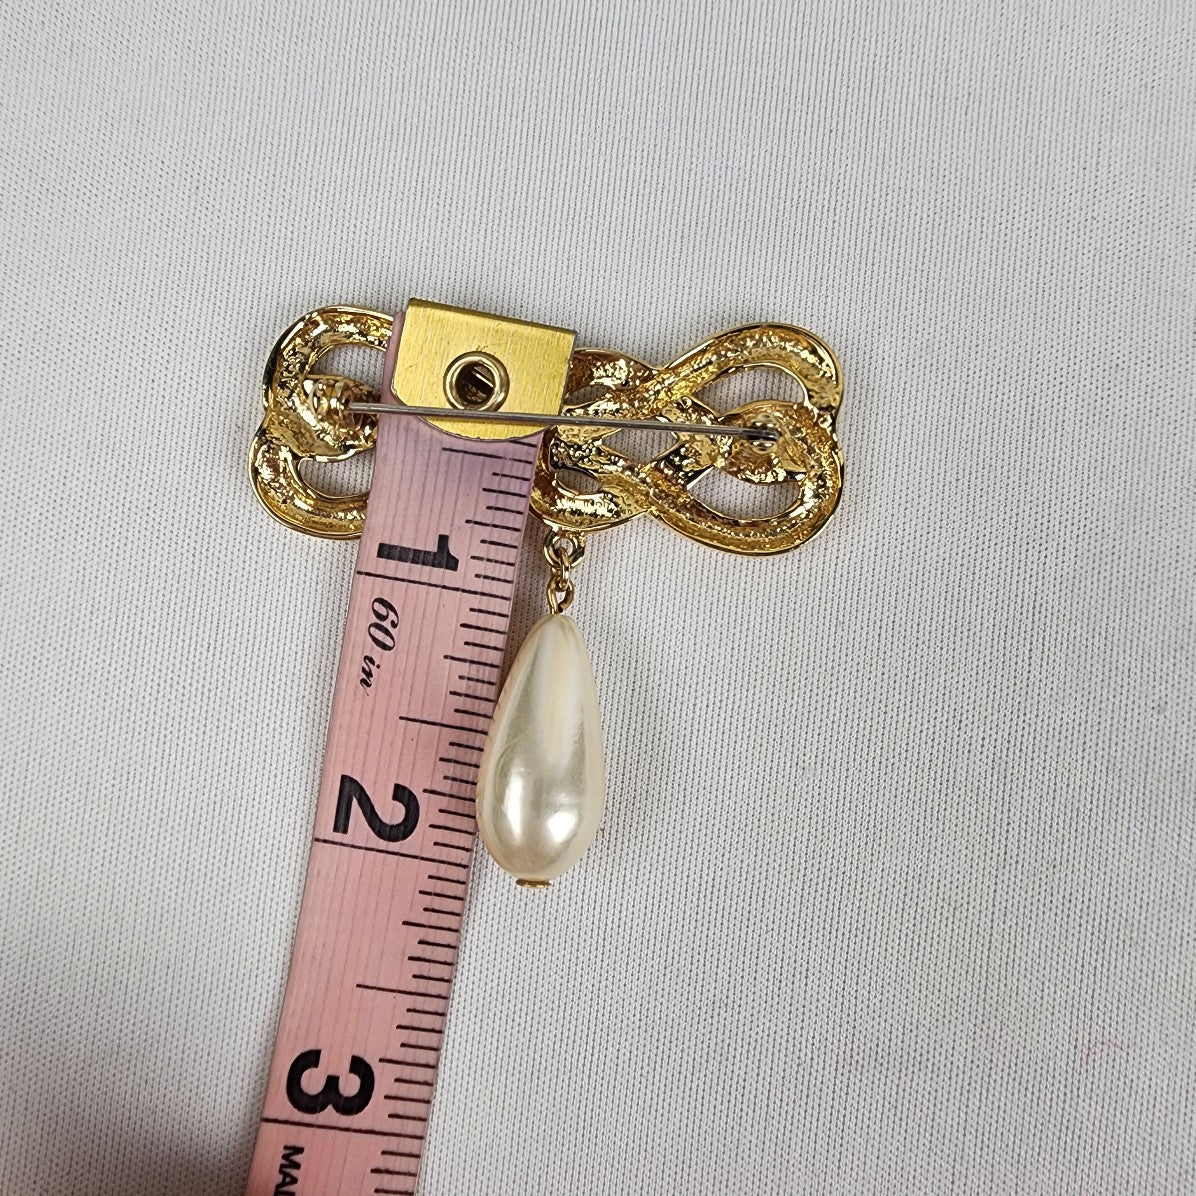 Vintage Gold Bow White Tear Drop Faux Pearl Brooch